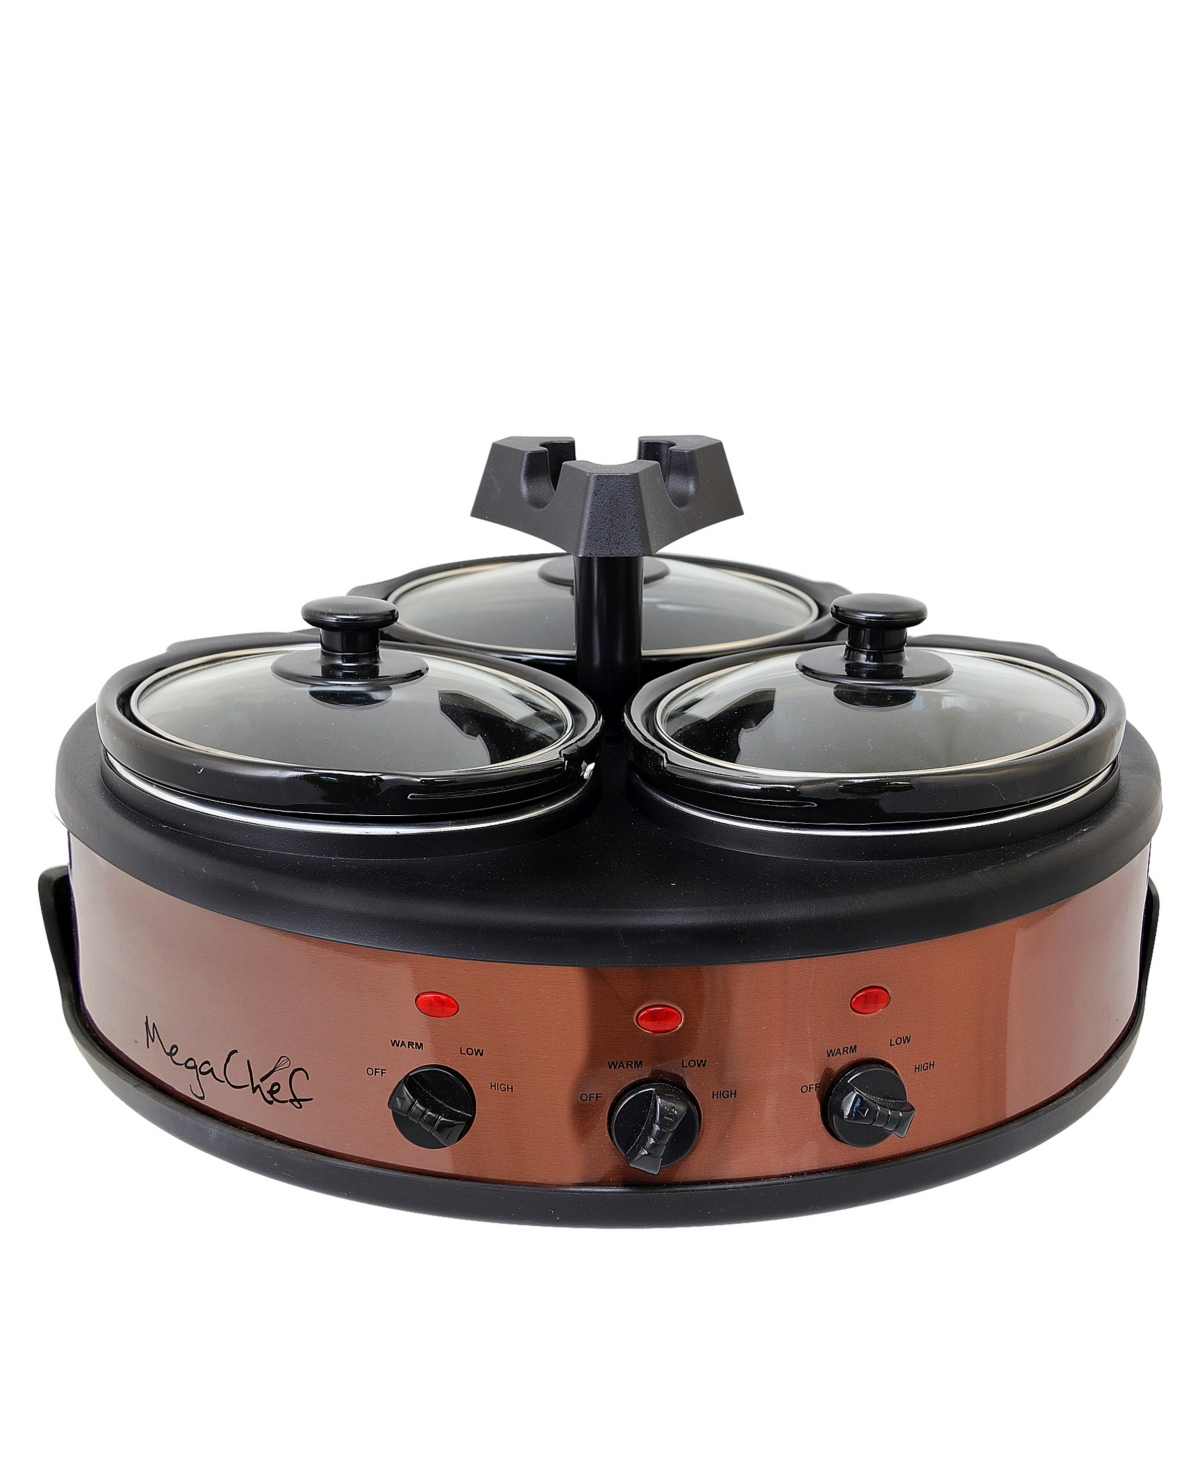 MegaChef Circular Buffet Slow Cooker w/ Triple 1.5 Quart Cooking Pots - Stainless Steel